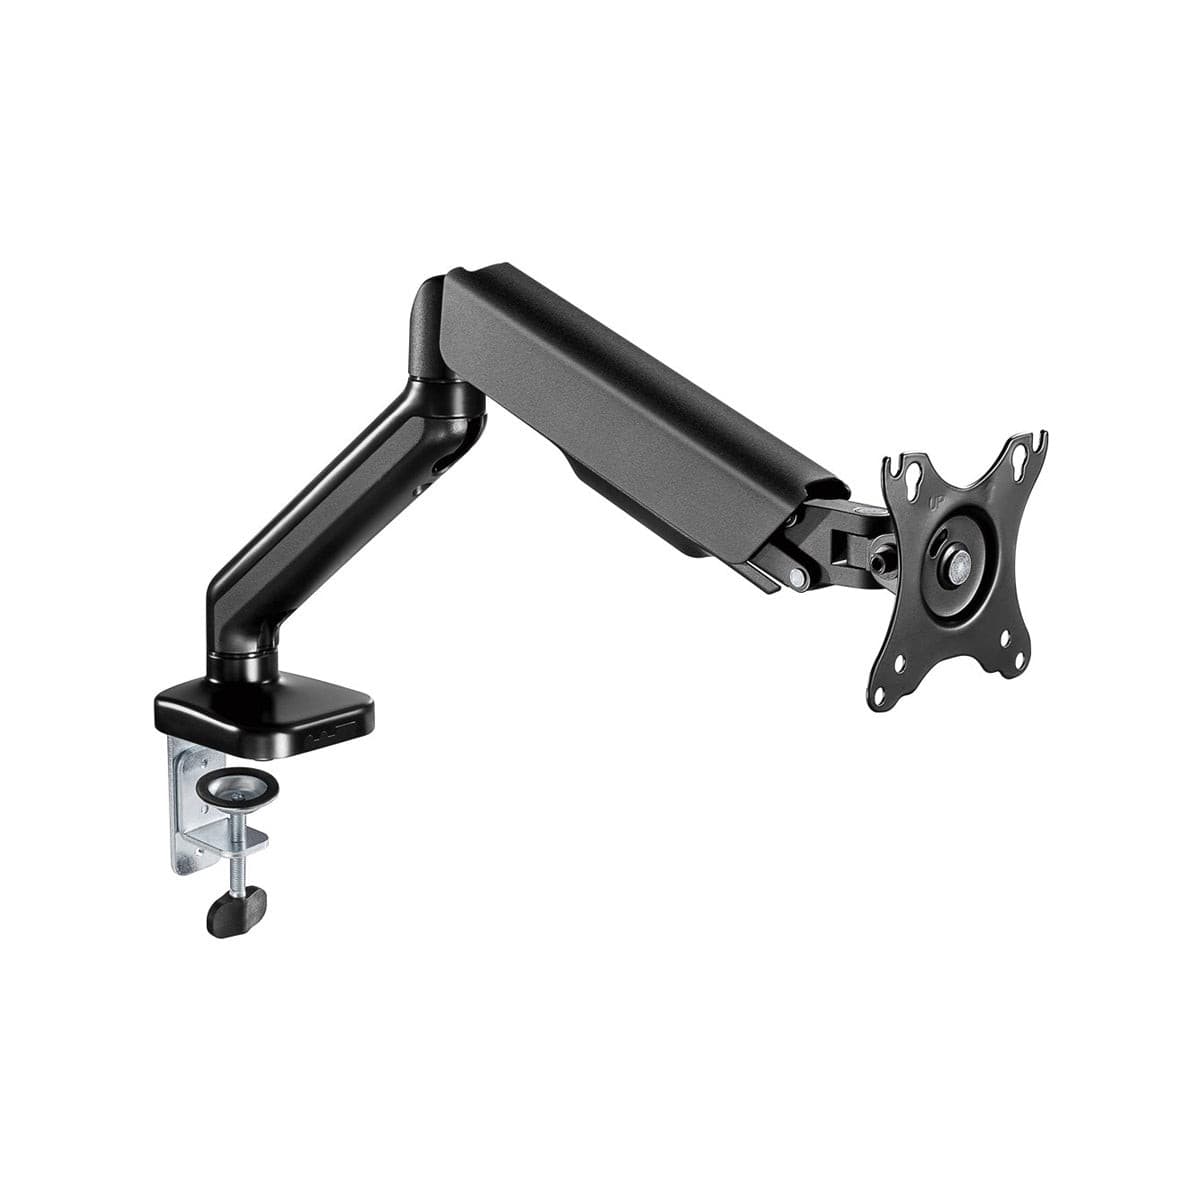 Goobay Single Monitor Mount with Gas Spring (17-32